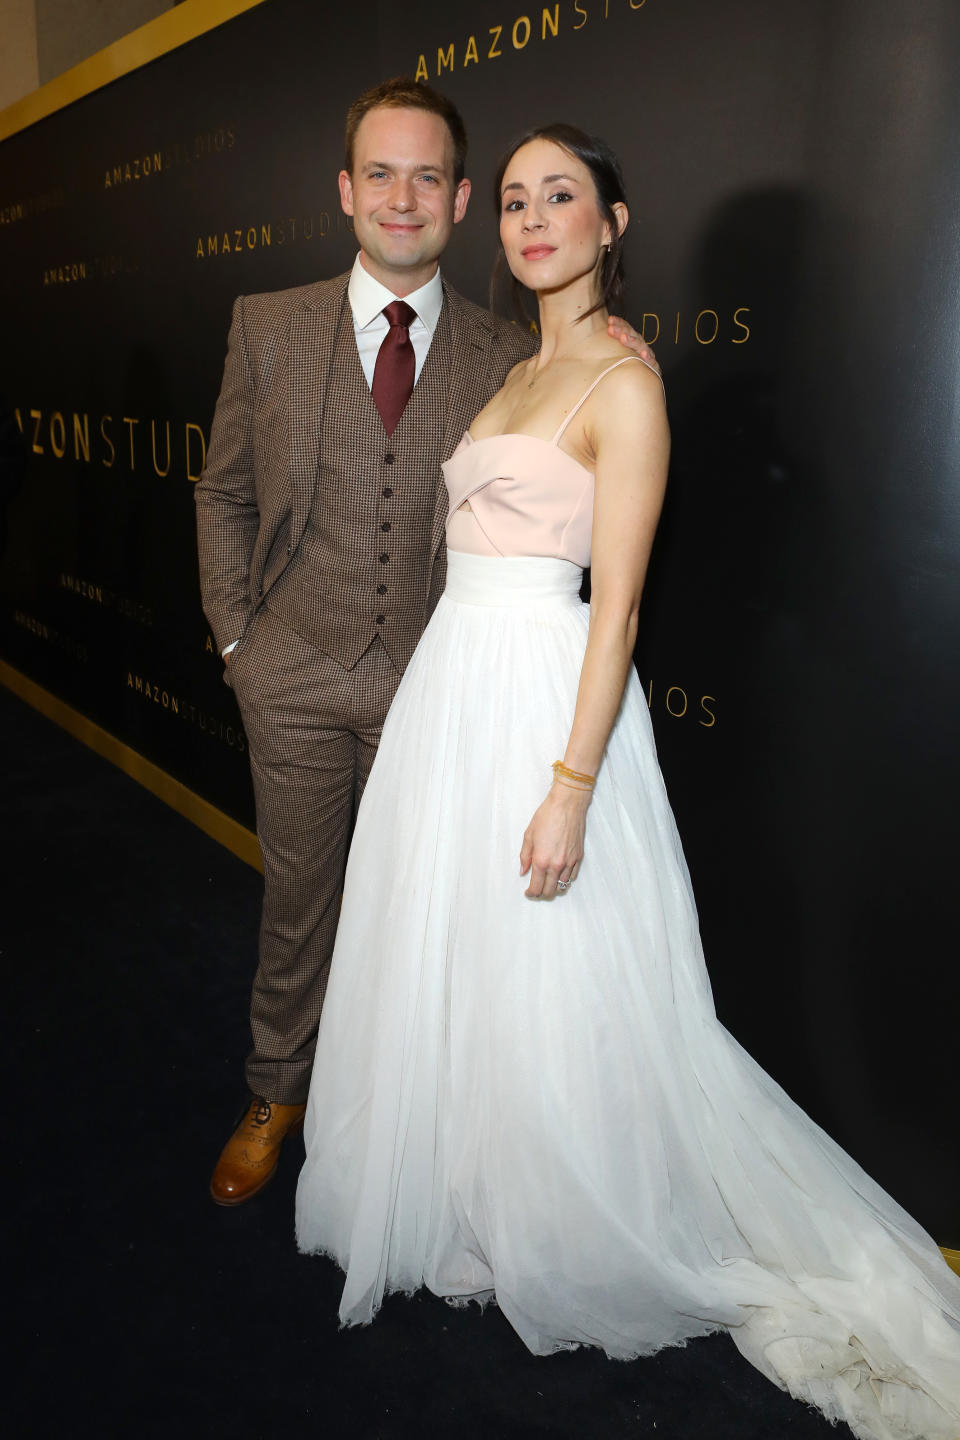 BEVERLY HILLS, CALIFORNIA - JANUARY 05: Patrick J. Adams and Troian Bellisario attend the Amazon Studios Golden Globes After Party at The Beverly Hilton Hotel on January 05, 2020 in Beverly Hills, California. (Photo by Jerod Harris/Getty Images)